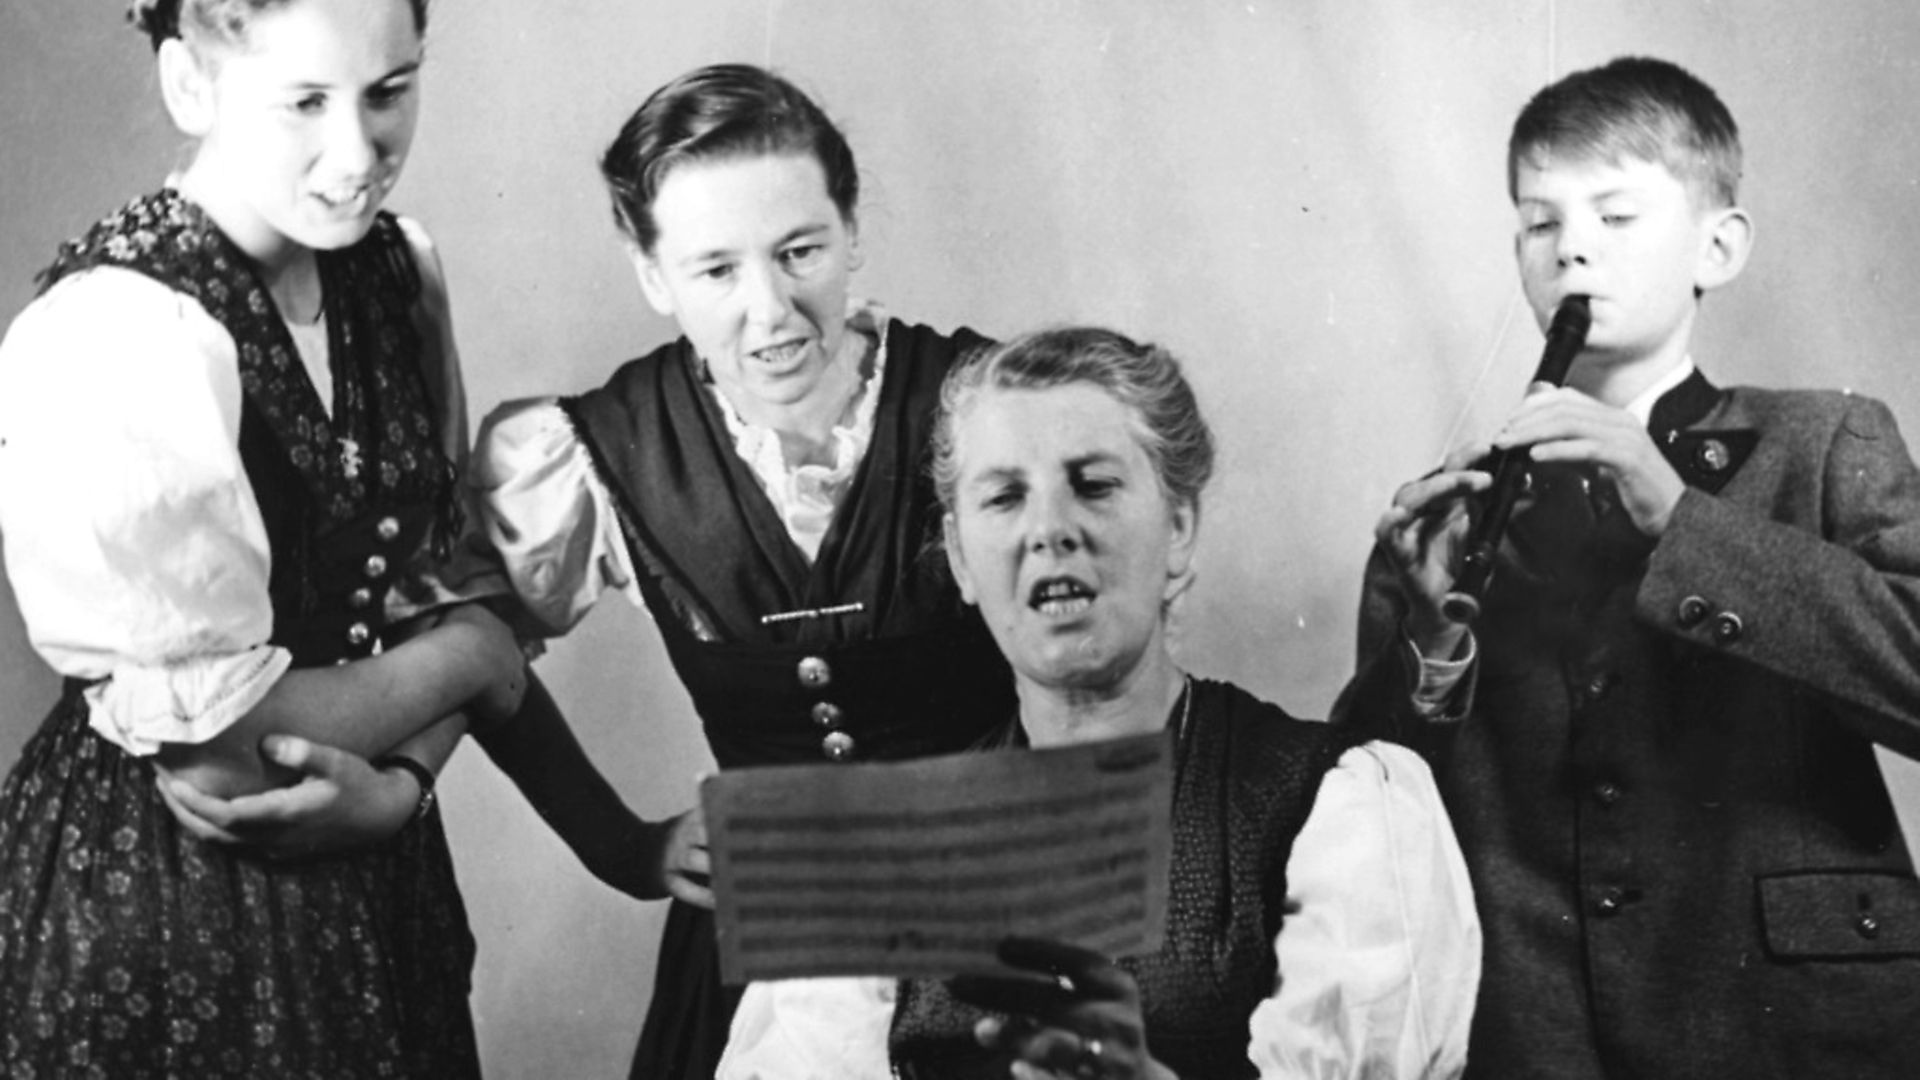 Portrait of Baroness Maria Von Trapp and three of her children, (L-R) Eleonore, Agatha and Johannes, singing from a piece of sheet music, London, circa 1950. Picture: George Konig/Keystone Features/Getty Images - Credit: Getty Images